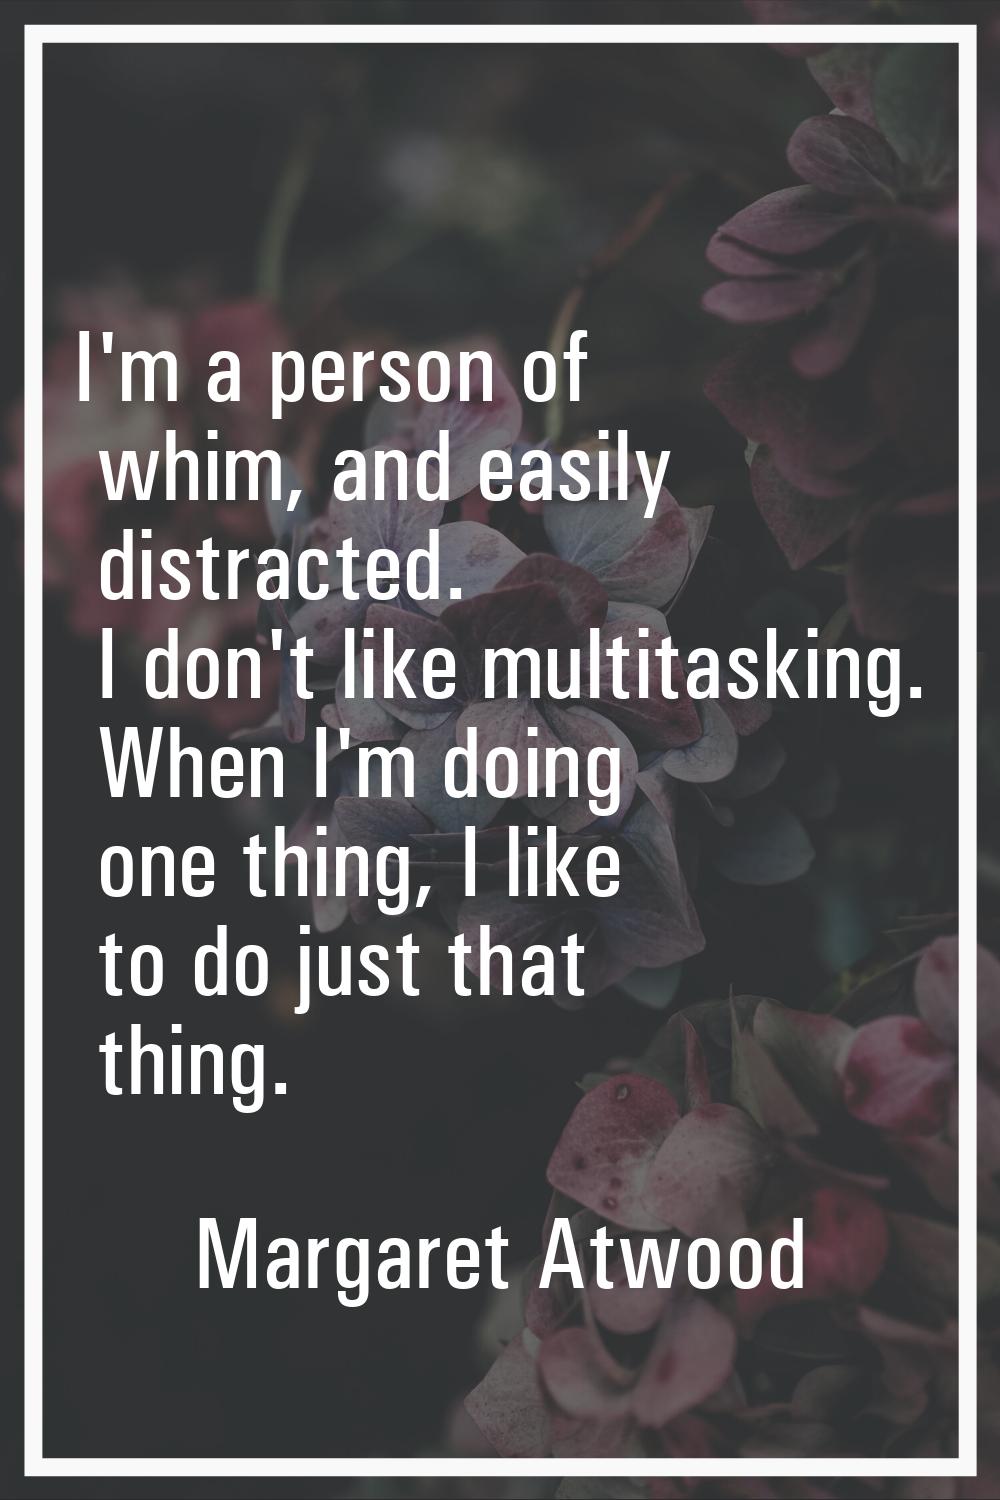 I'm a person of whim, and easily distracted. I don't like multitasking. When I'm doing one thing, I